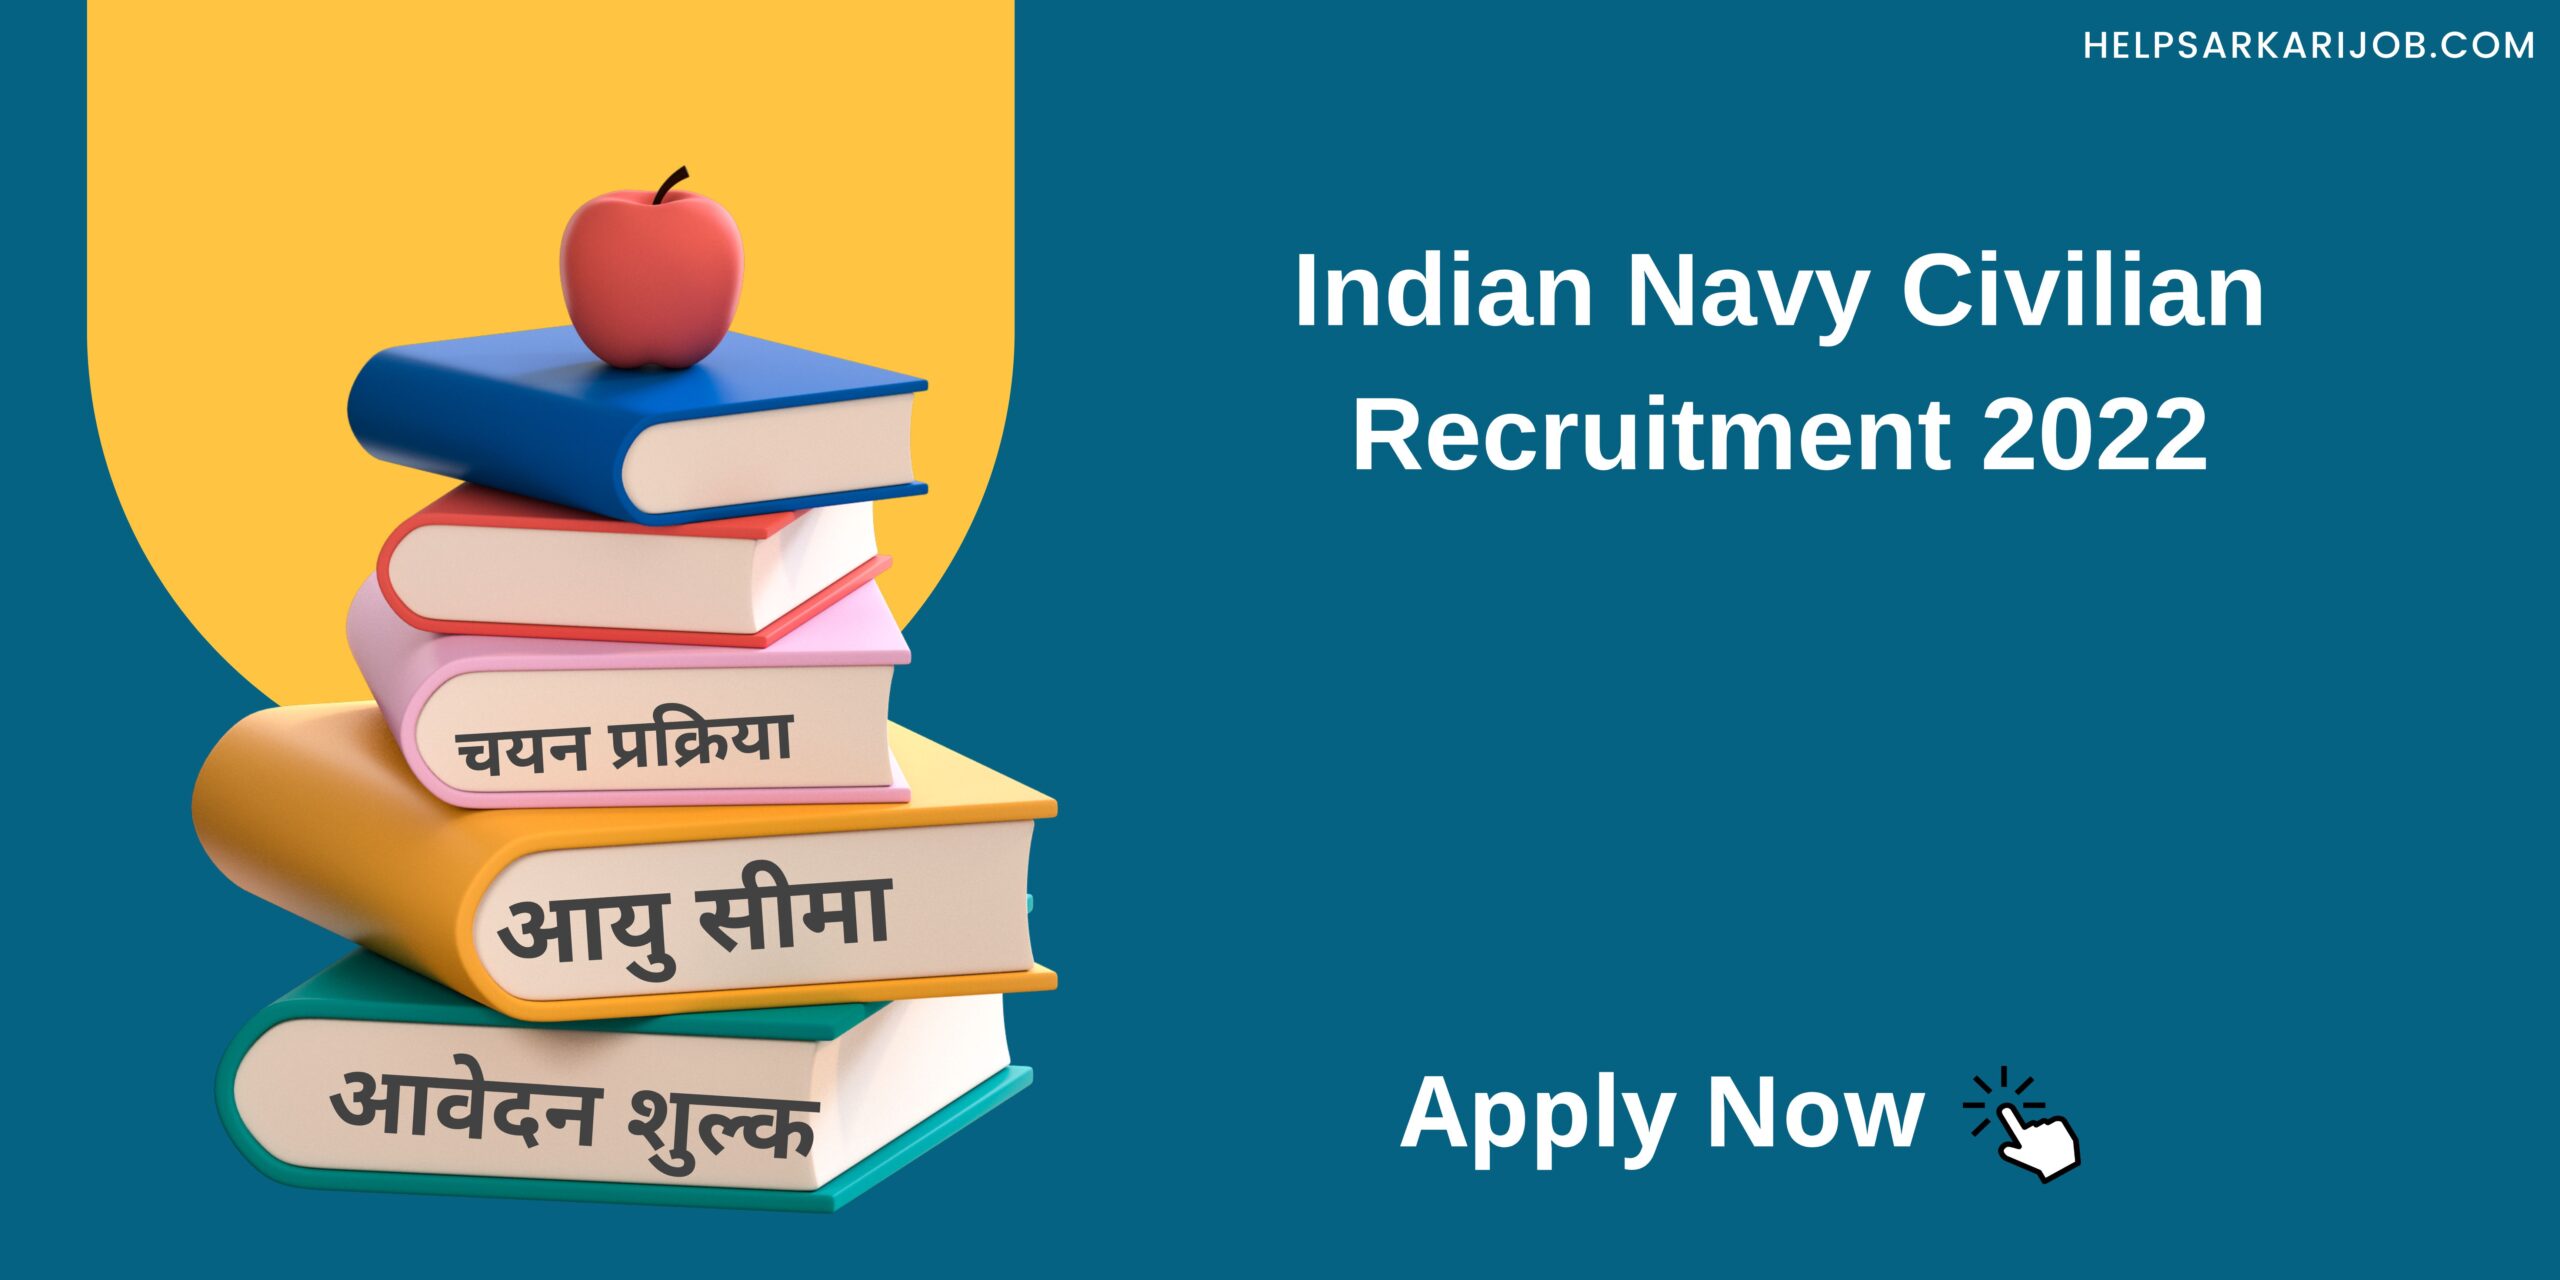 Indian Navy Civilian Recruitment 2022 scaled -